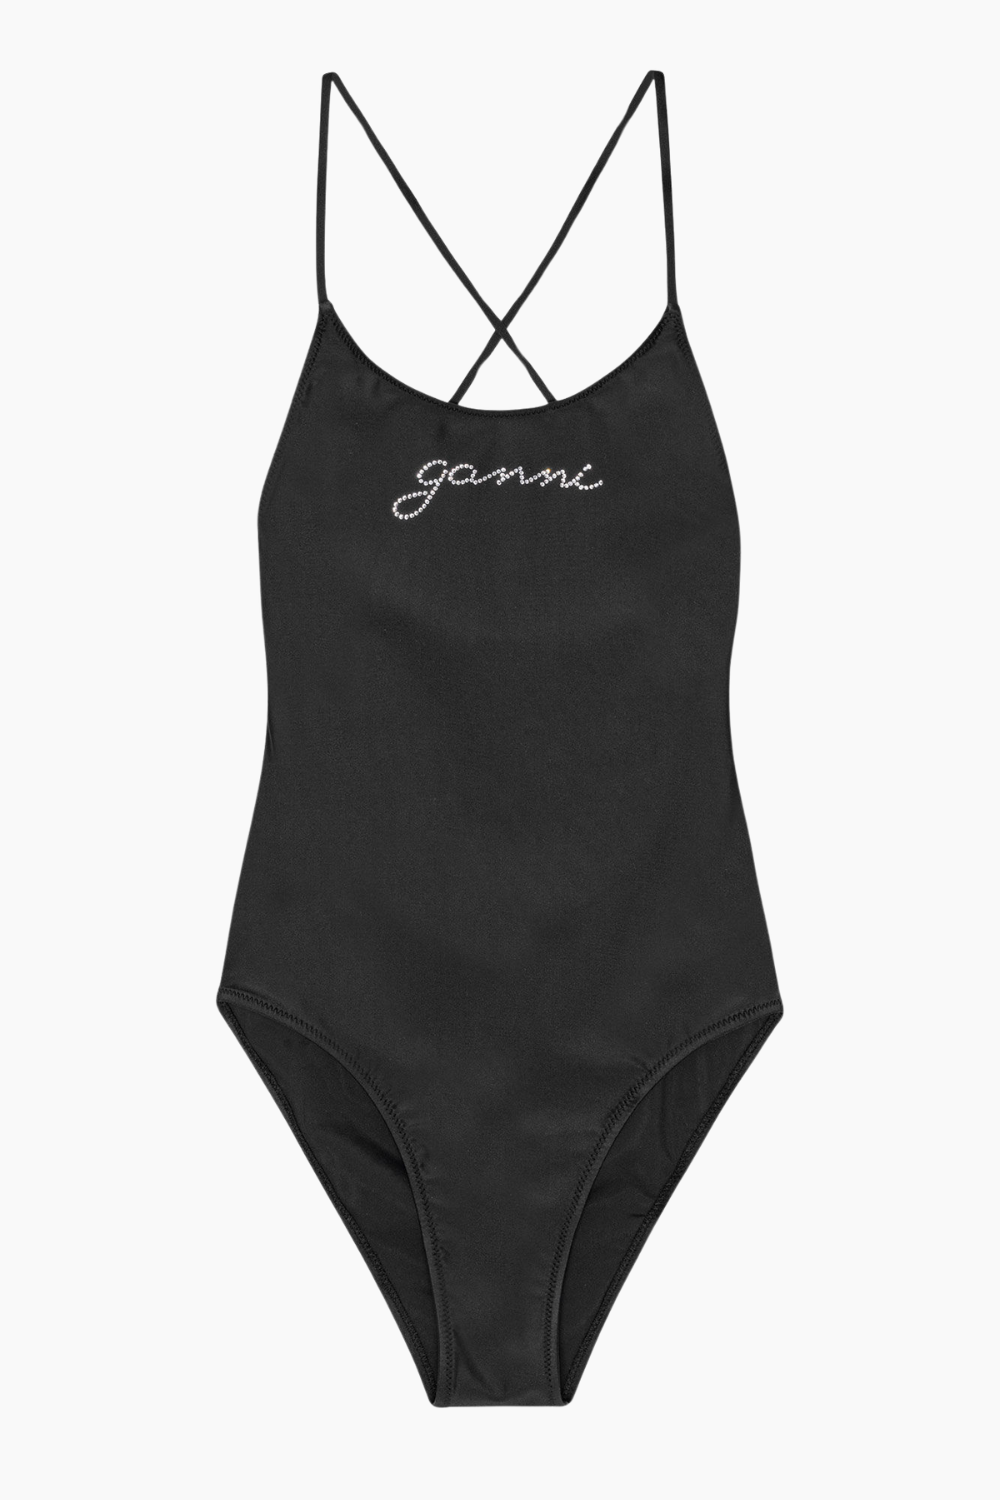 Recycled Graphic Tie String Swimsuit A6064 - Black - GANNI